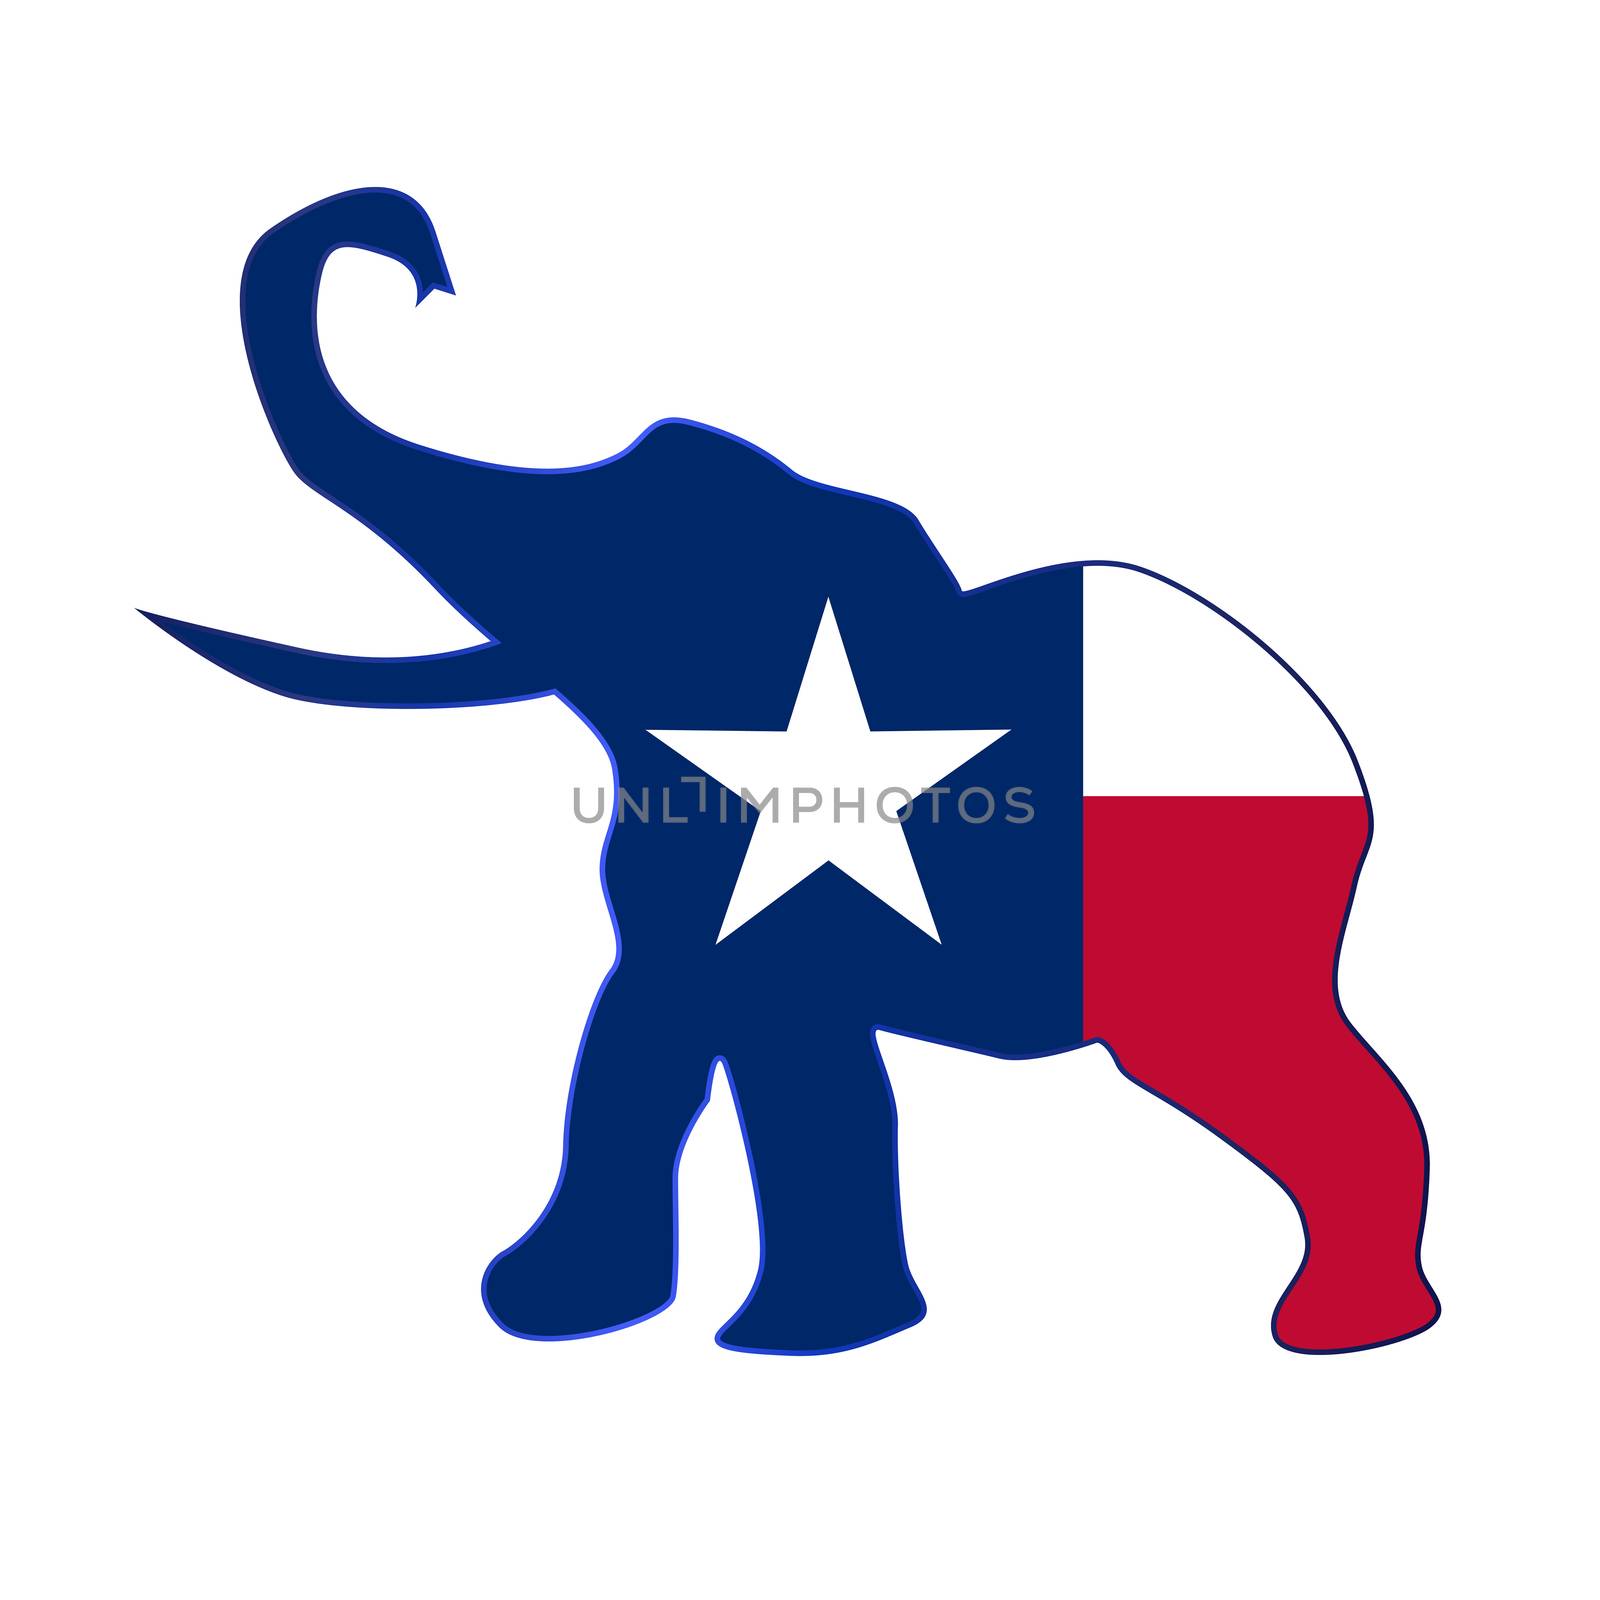 The Texas Republican party elephant flag over a white background